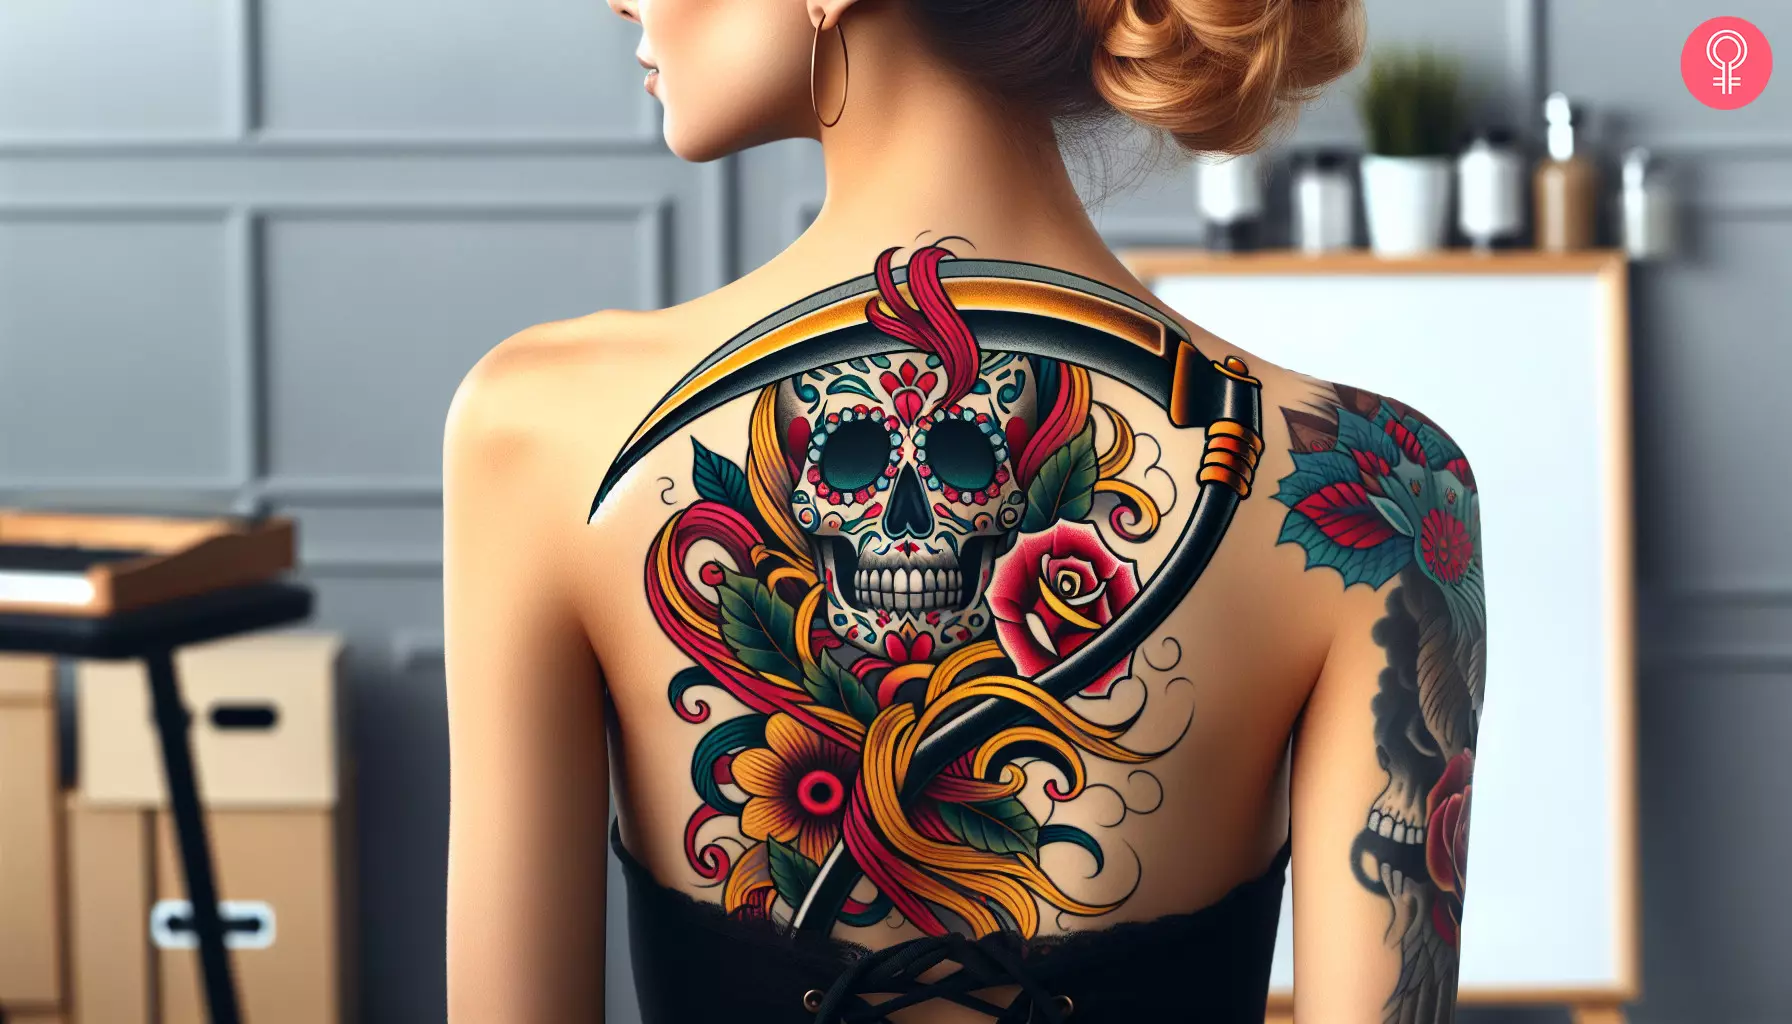 A colorful scythe tattoo featuring a sugar skull on the back